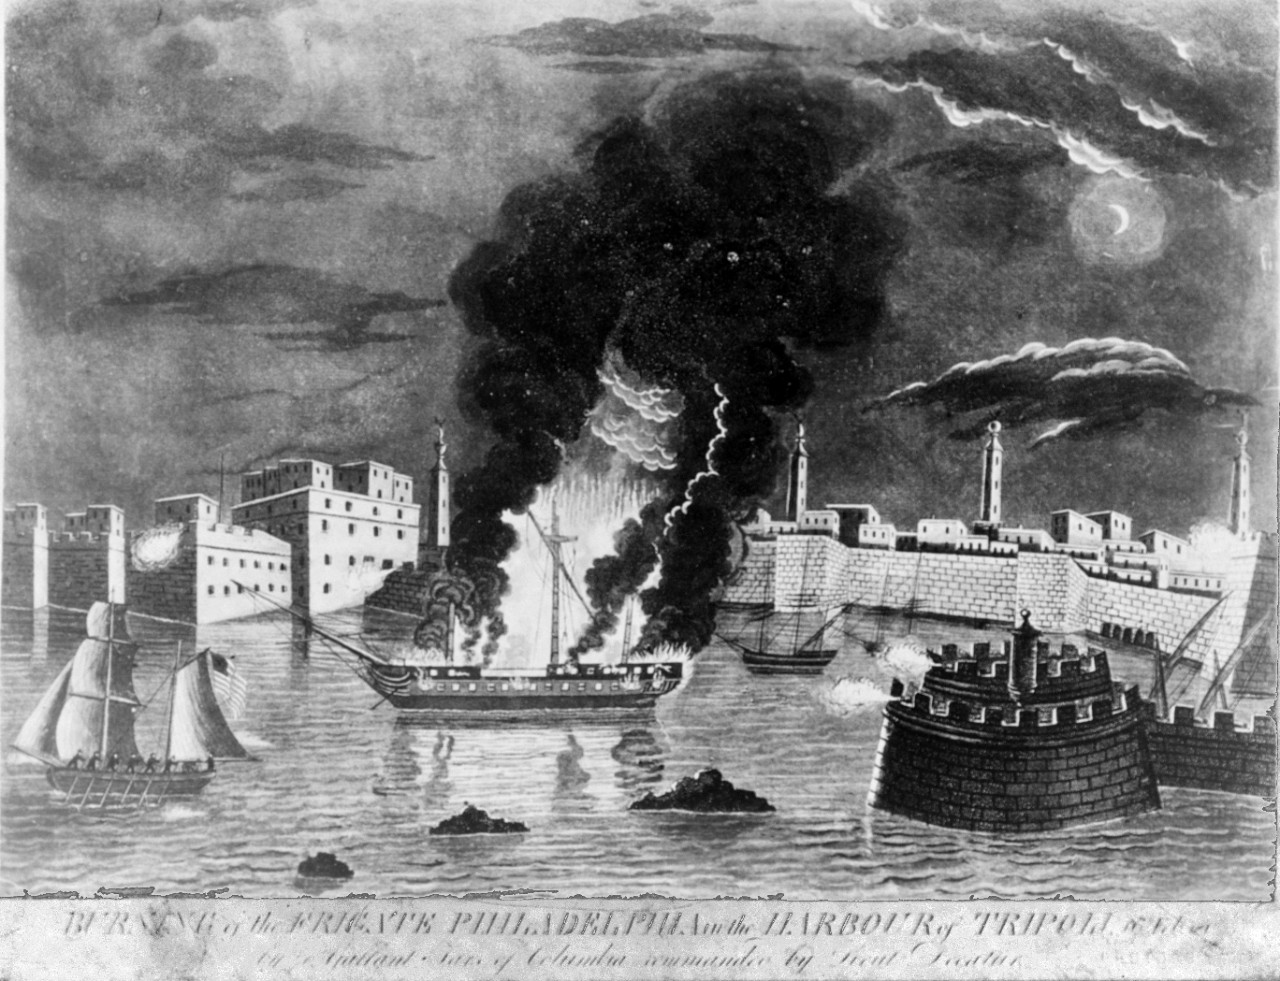 Photo #: NH 56751  &quot;Burning of the Frigate Philadelphia in the Harbour of Tripoli, 16th Feb. 1804, by 70 Gallant Tars of Columbia commanded by Lieut. Decatur&quot;